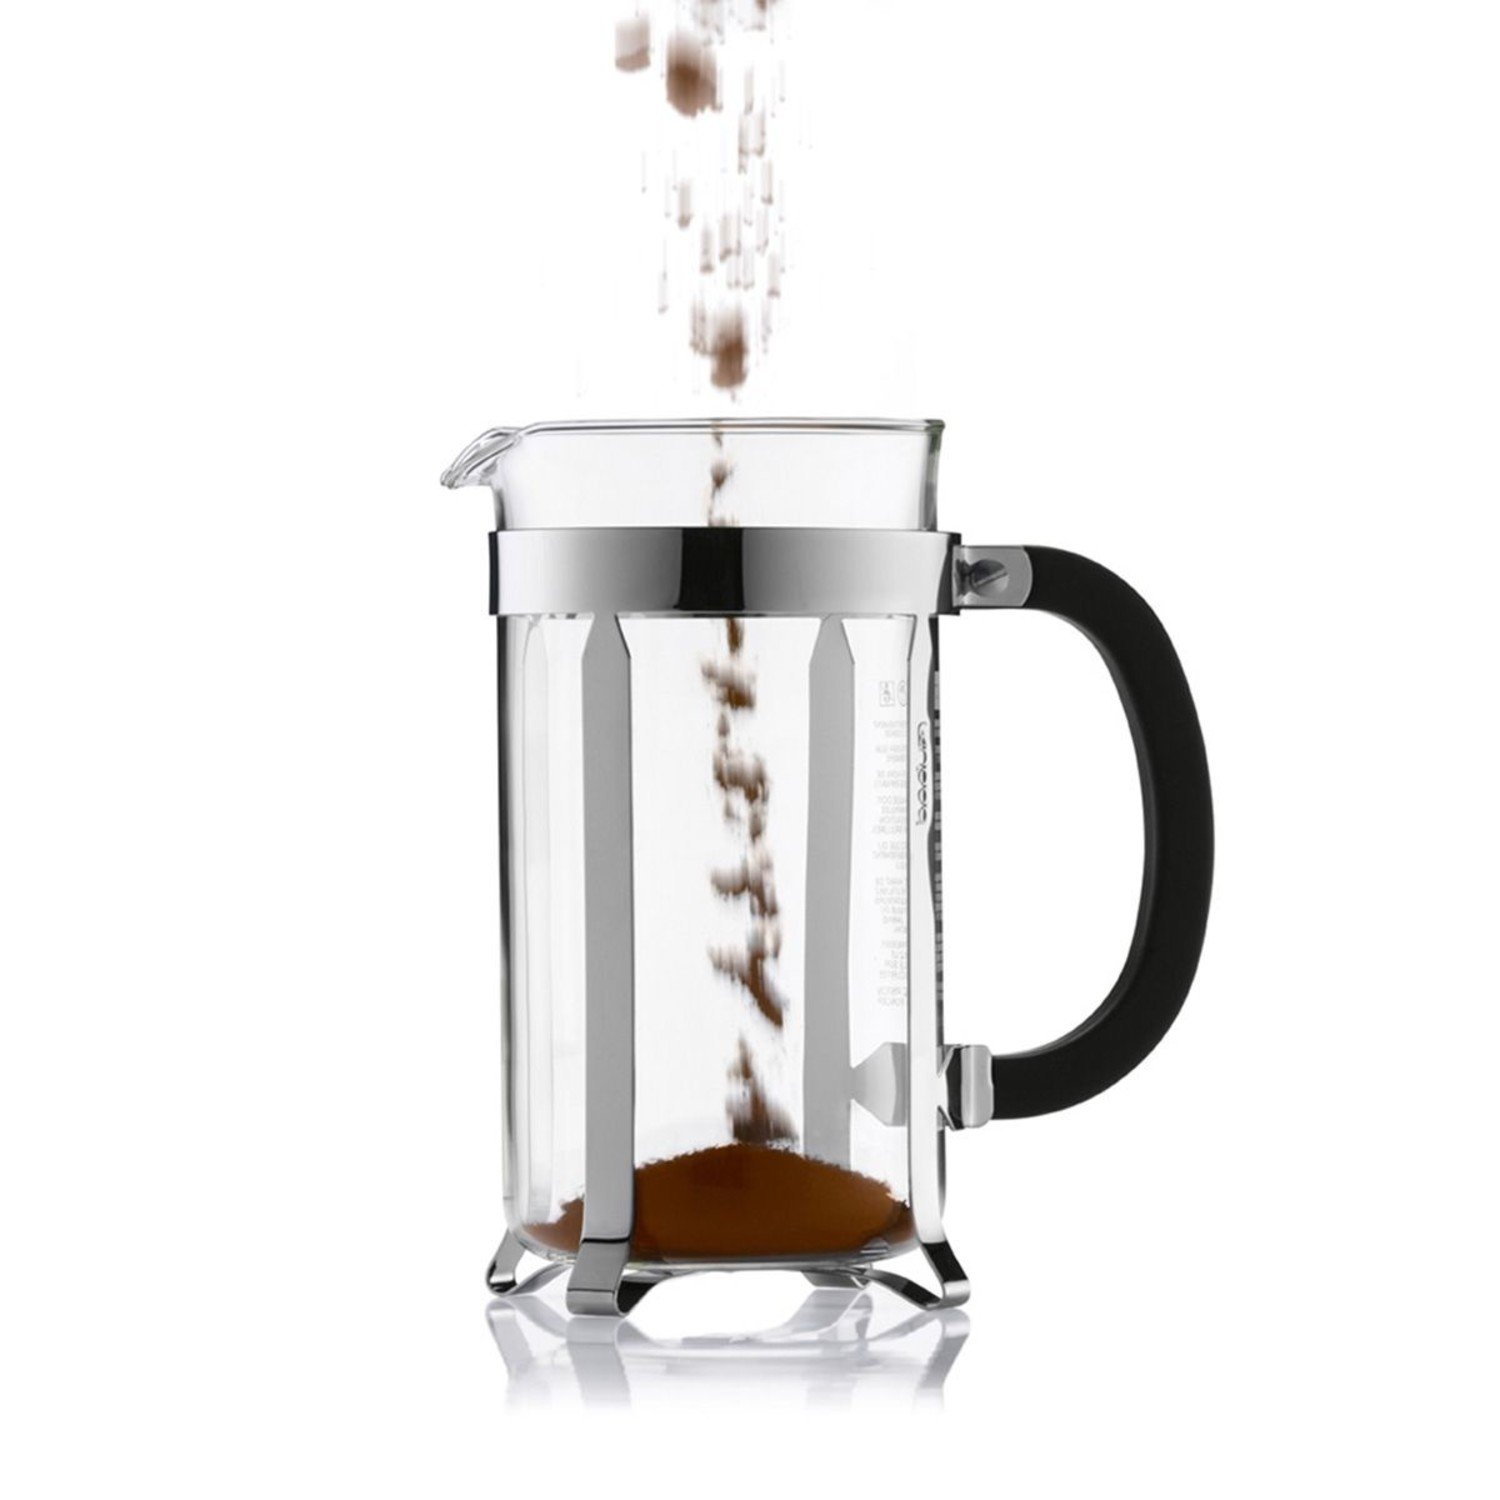 BODUM Chambord French Press ~ 3 cup, 8 cup, 12 cup